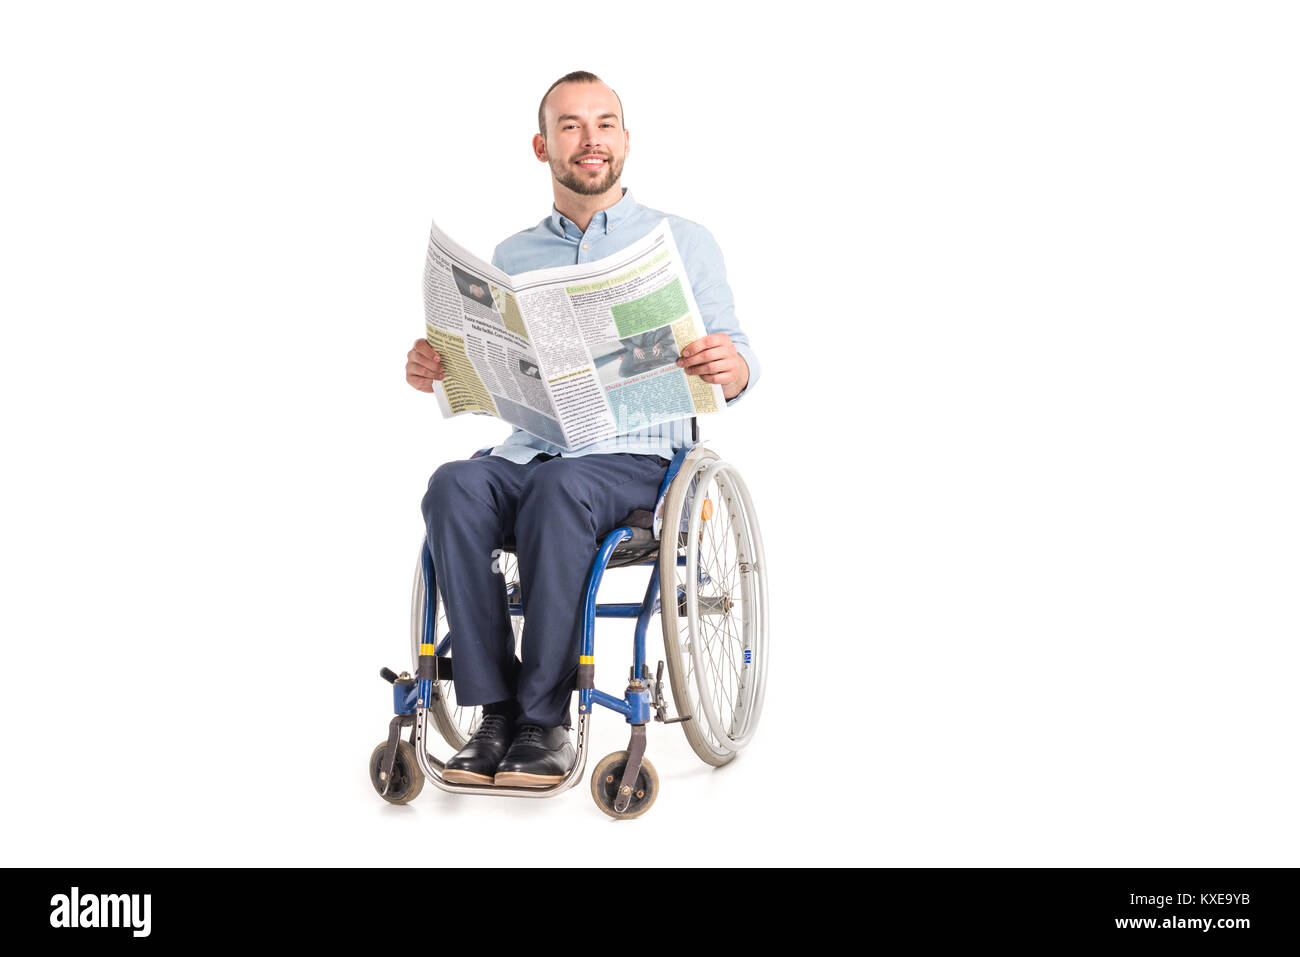 Man in wheelchair with newspaper Banque D'Images